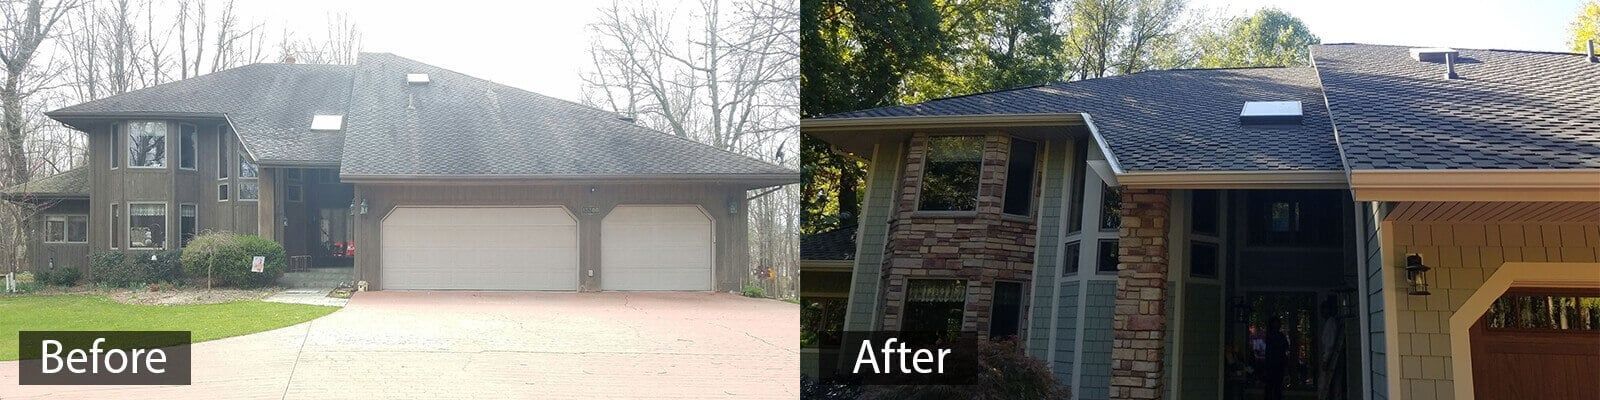 Hundt before and after - South Bend, IN - A&M Home Services